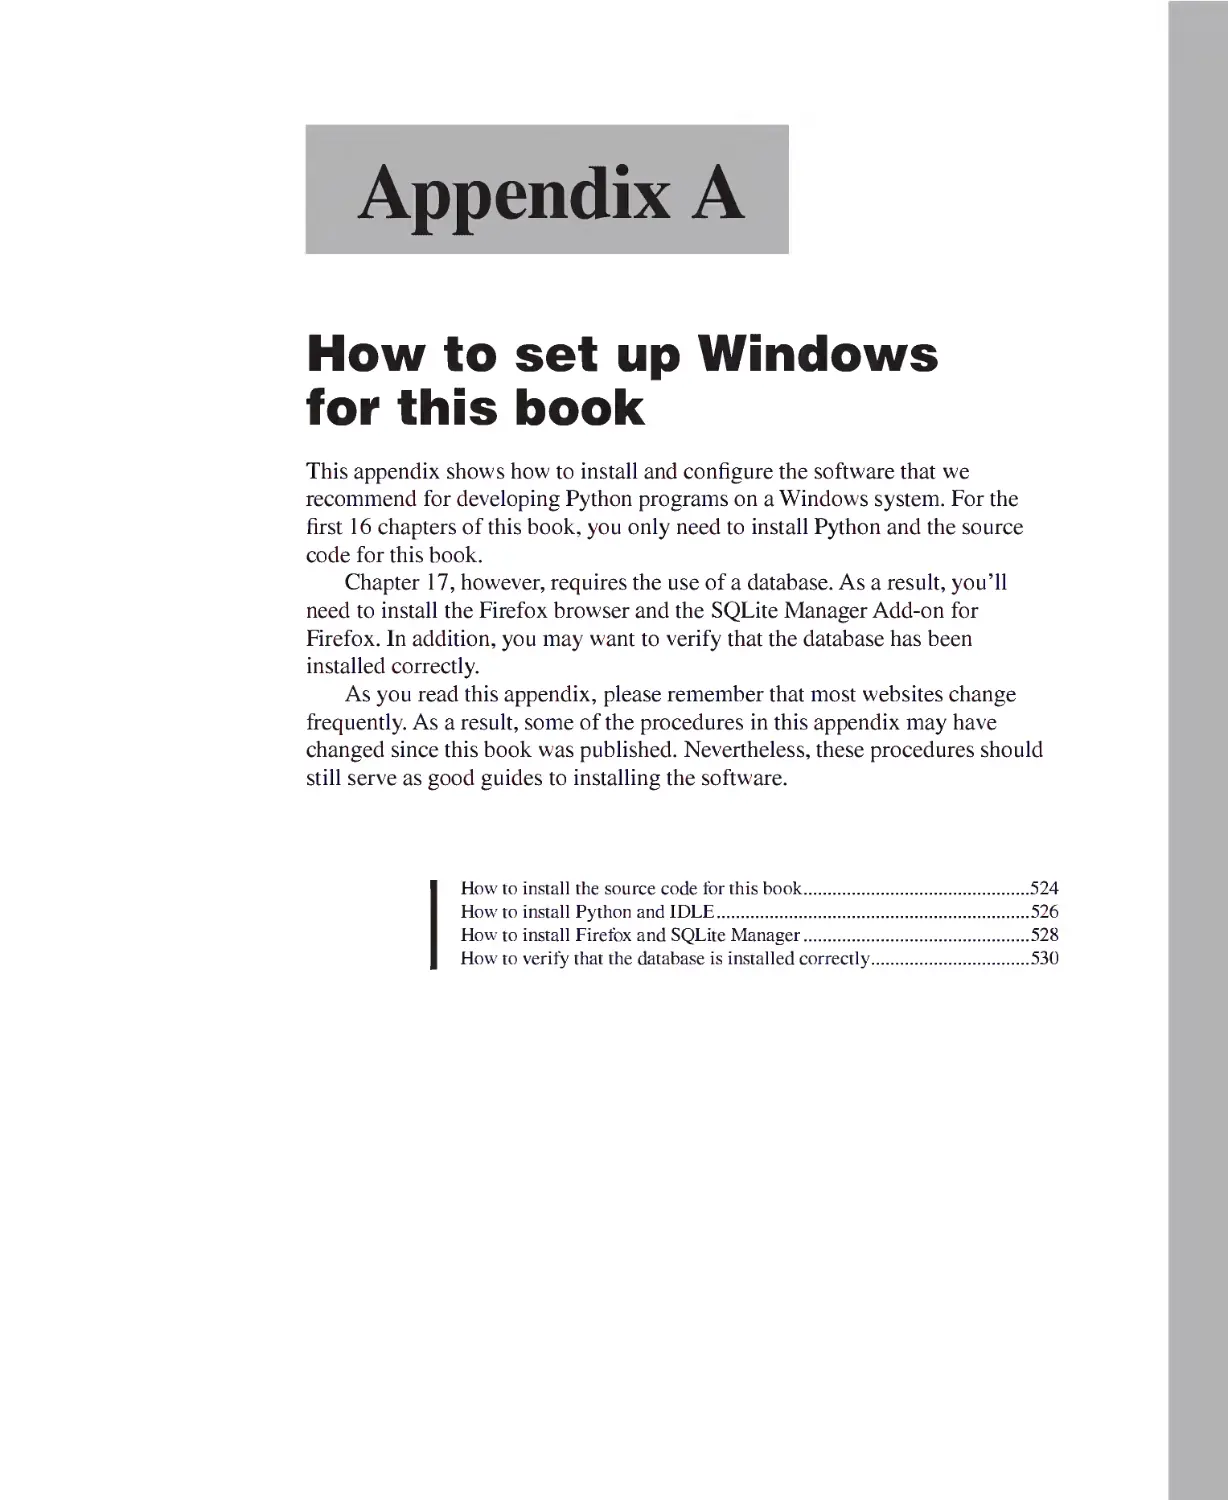 Appendix A - How to Set Up Windows for This Book